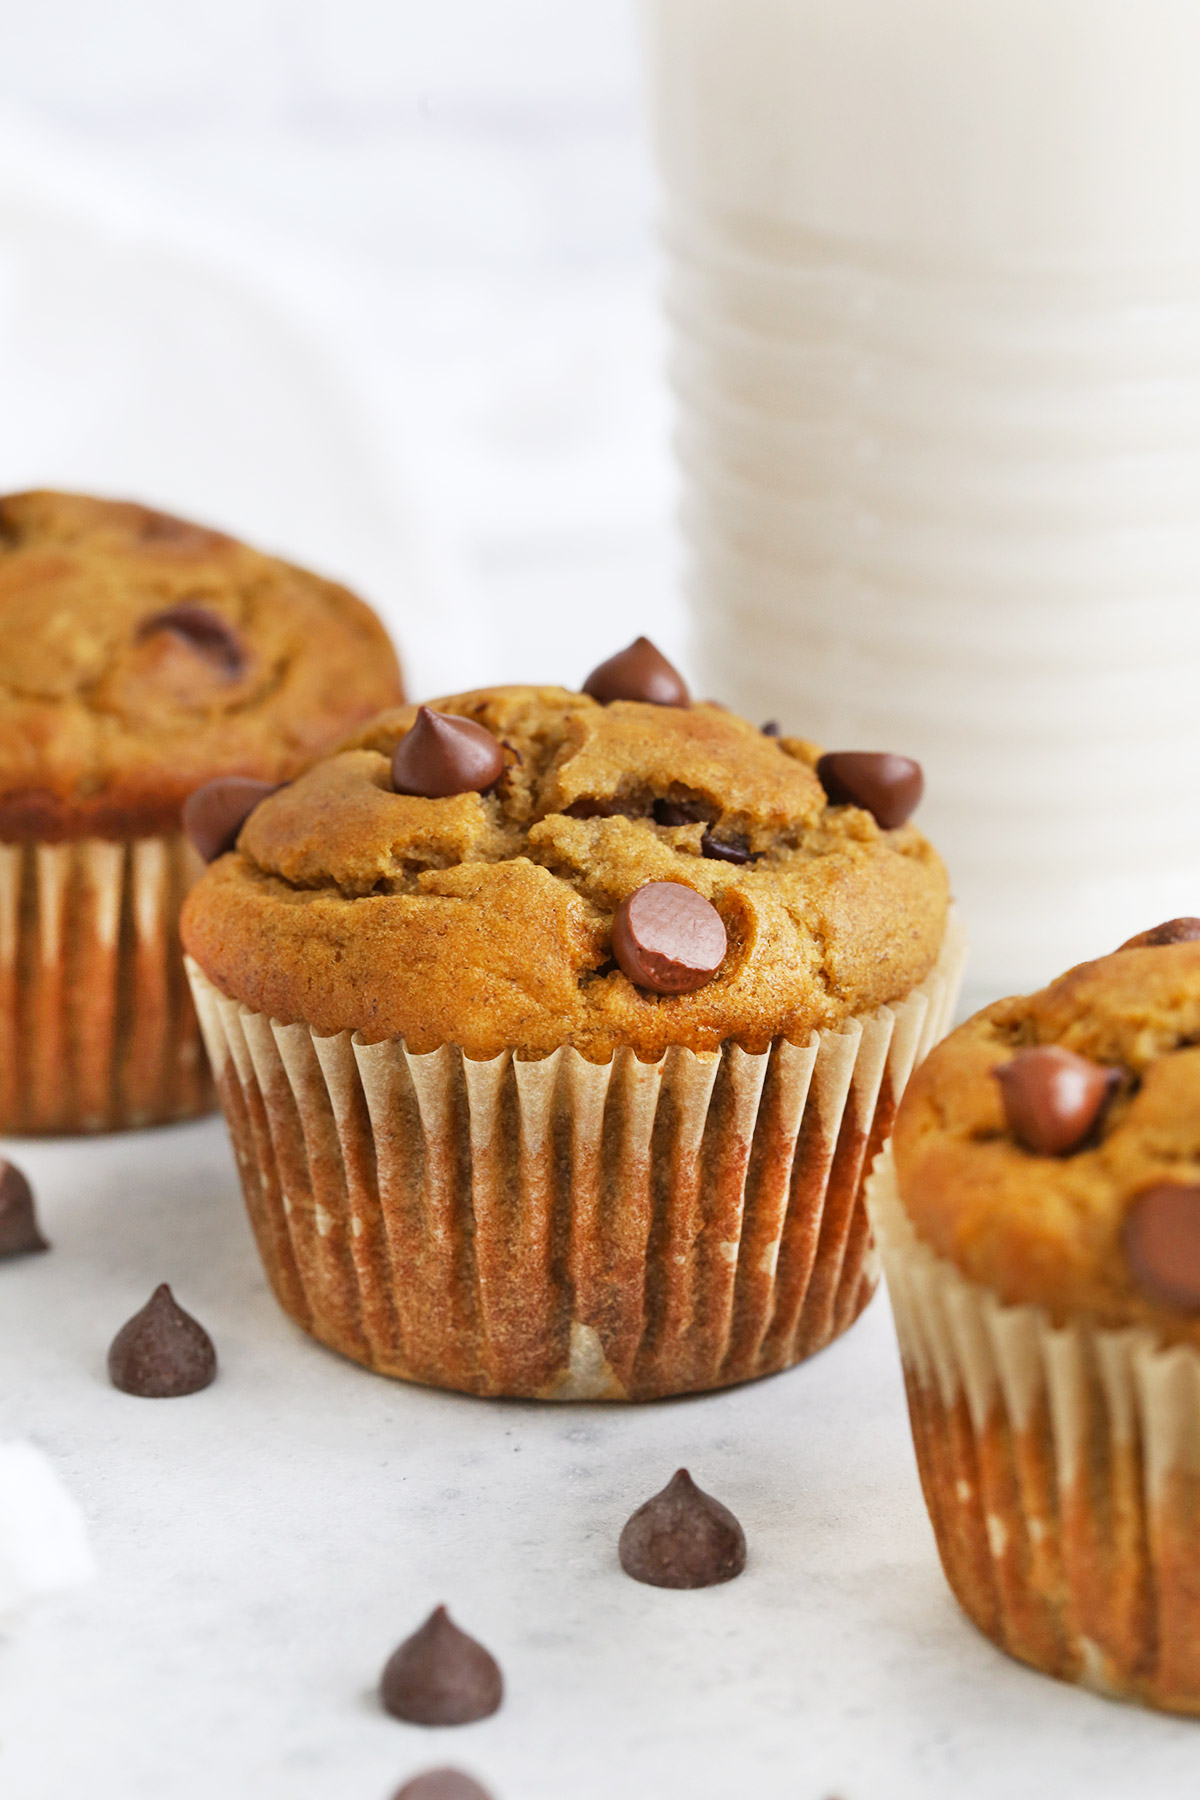 Three gluten-free chocolate chip banana muffins on a white background with a glass of almond milk